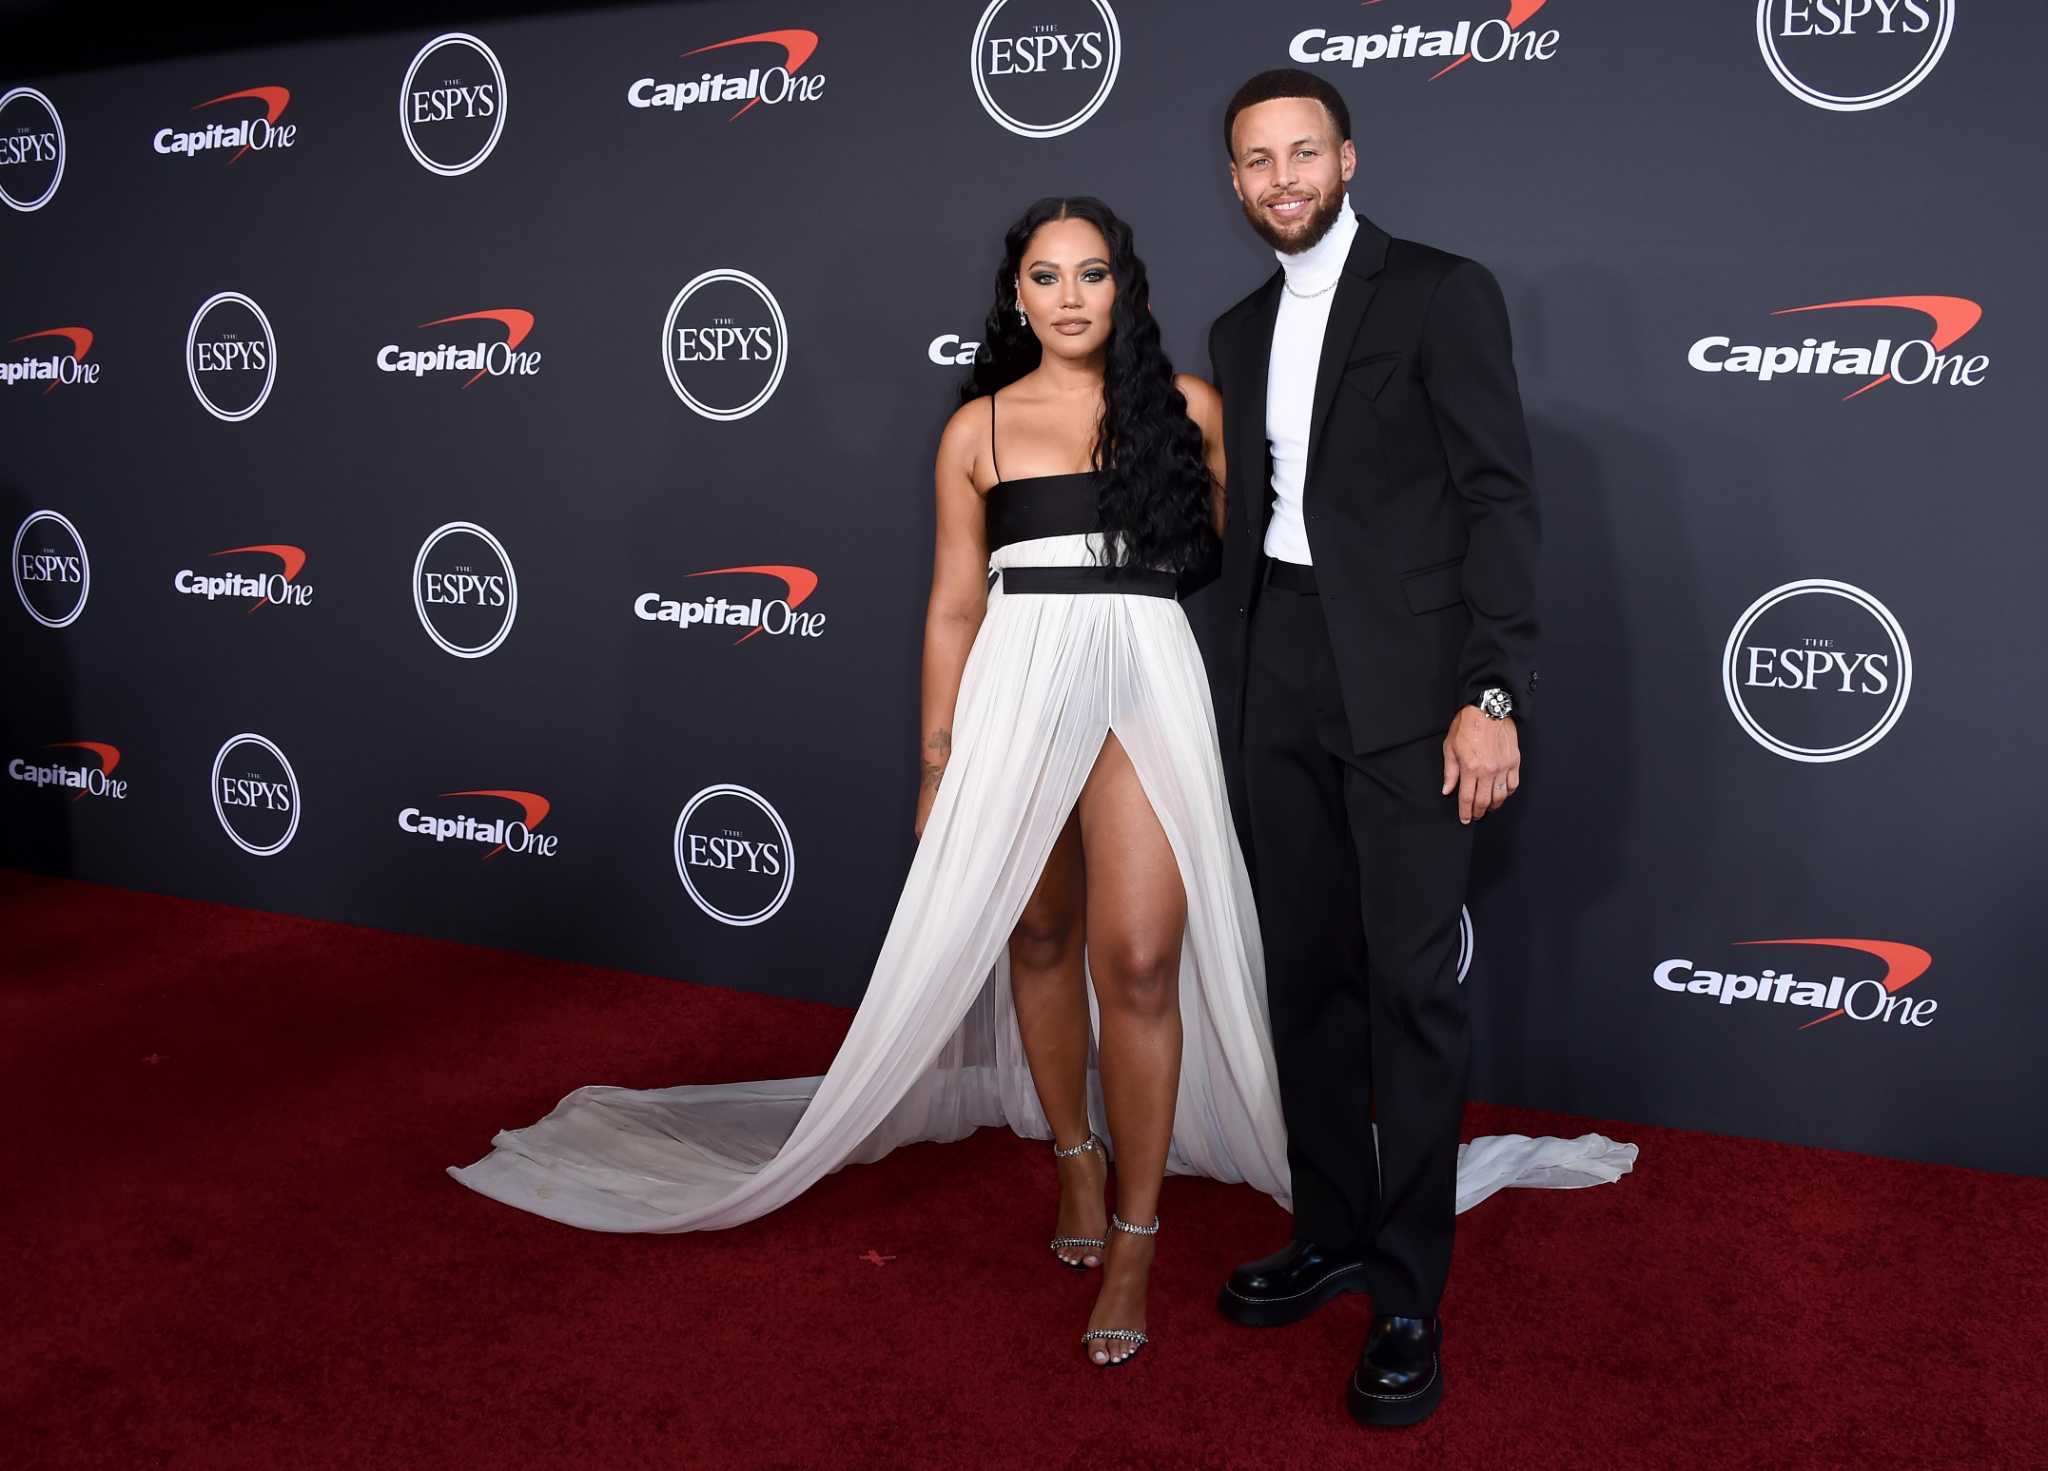 Stephen Curry hosts, Warriors have a big night at the ESPYS